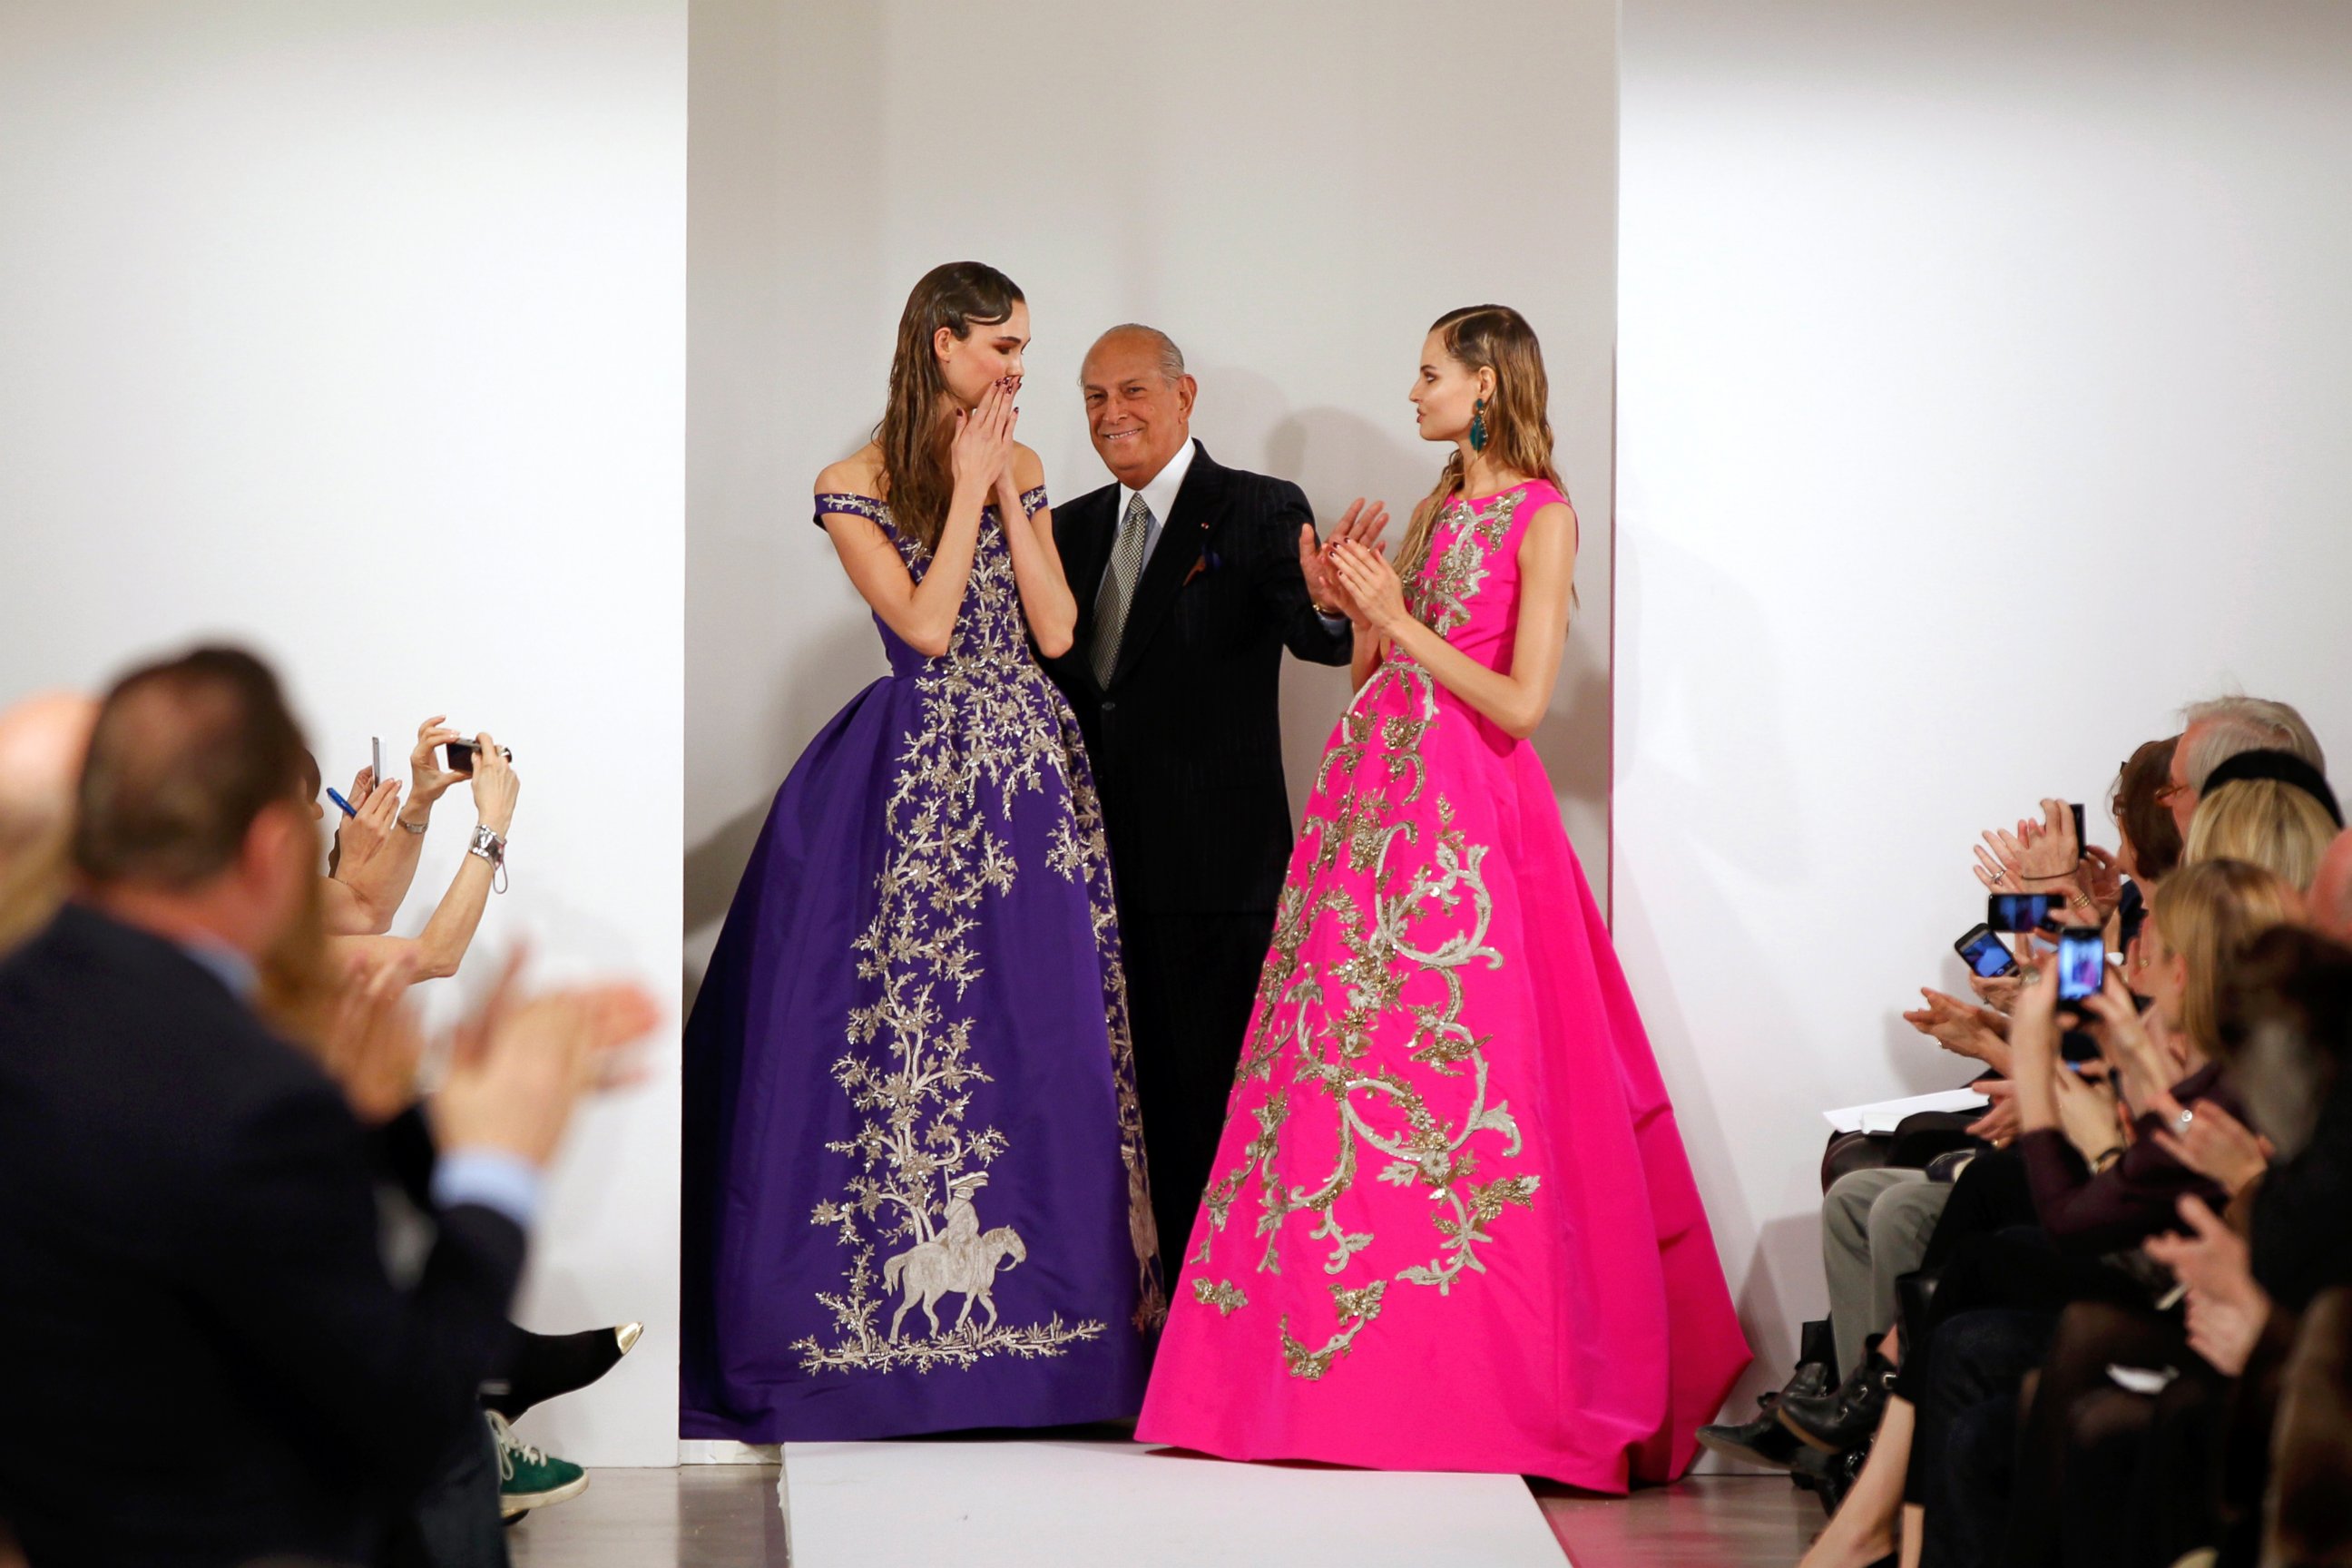 PHOTO: Designer Oscar De La Renta smiles with model Karlie Kloss and another model after presenting his Autumn/Winter 2013 collection during New York Fashion Week, Feb. 12, 2013.